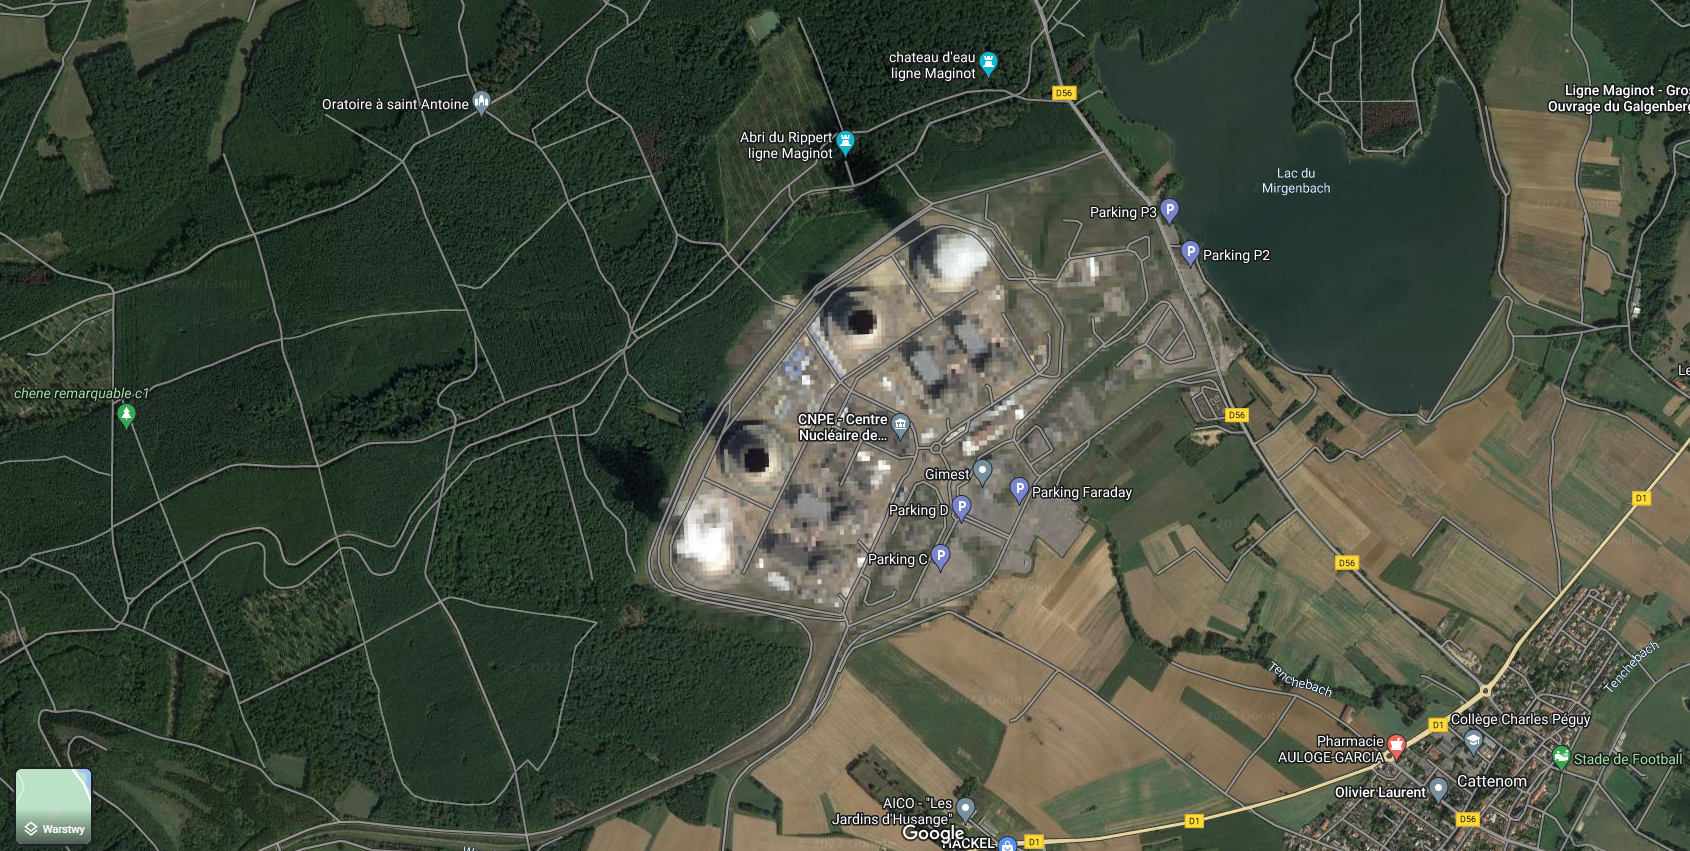 Google Maps: Cattenom Nuclear Power Plant